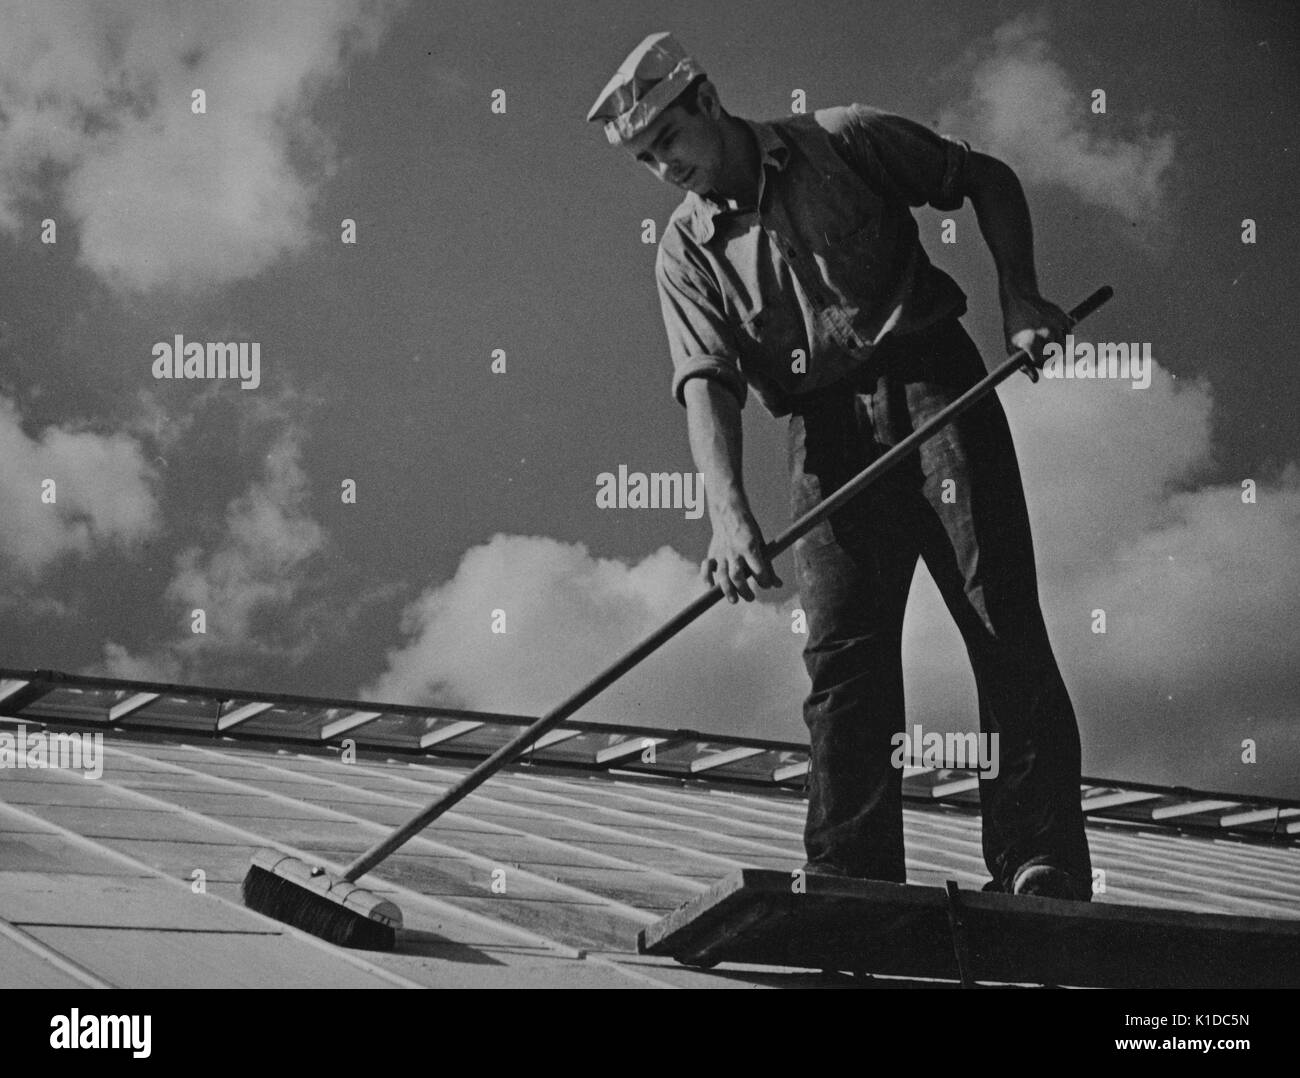 Worker cleaning glass on top of an experimental greenhouse at the United States Department of Agriculture experimental farm, Beltsville, Maryland, 1935. From the New York Public Library. Stock Photo